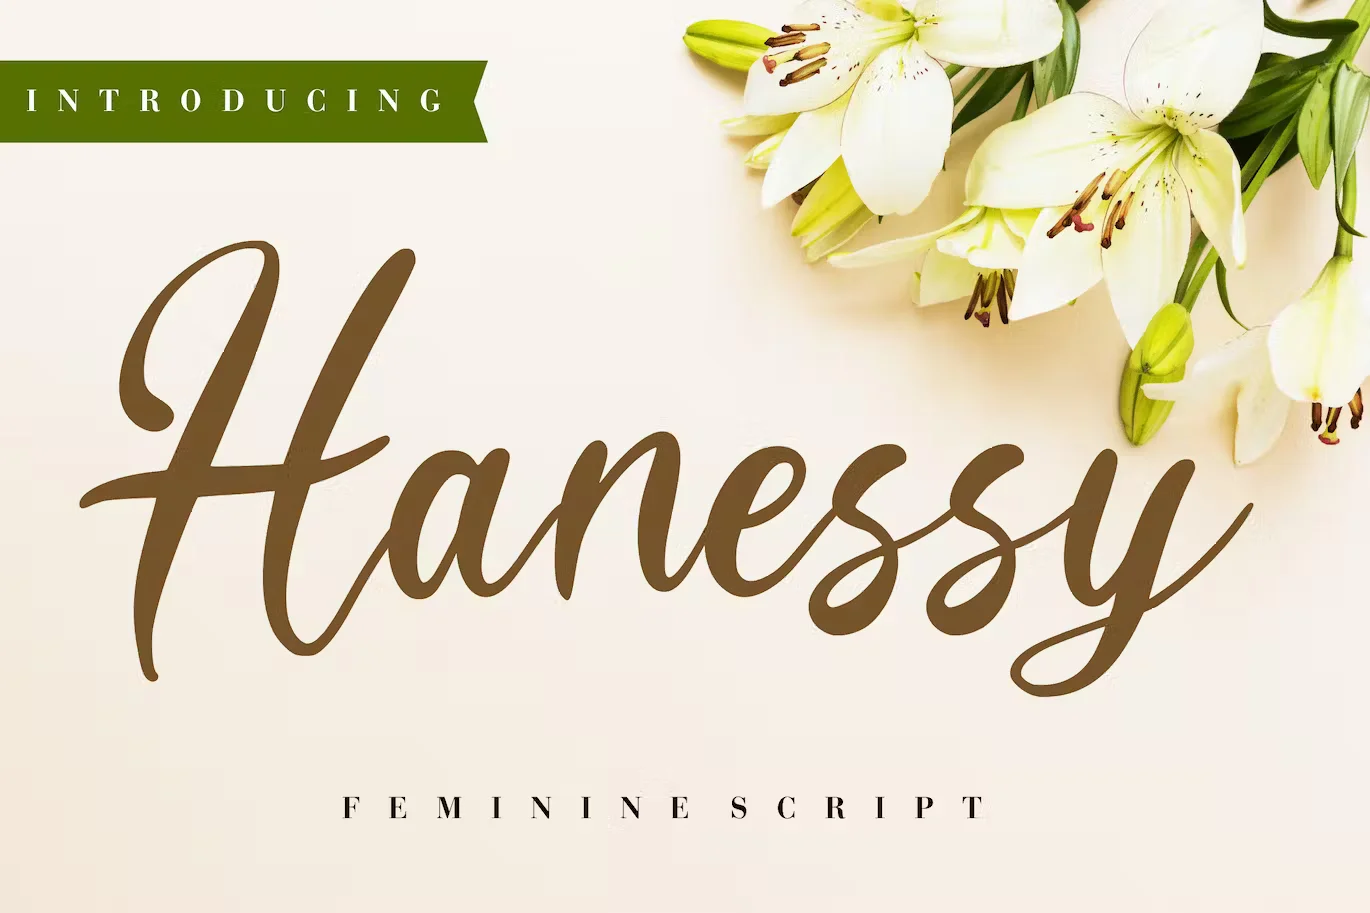 Hanessy Business Font